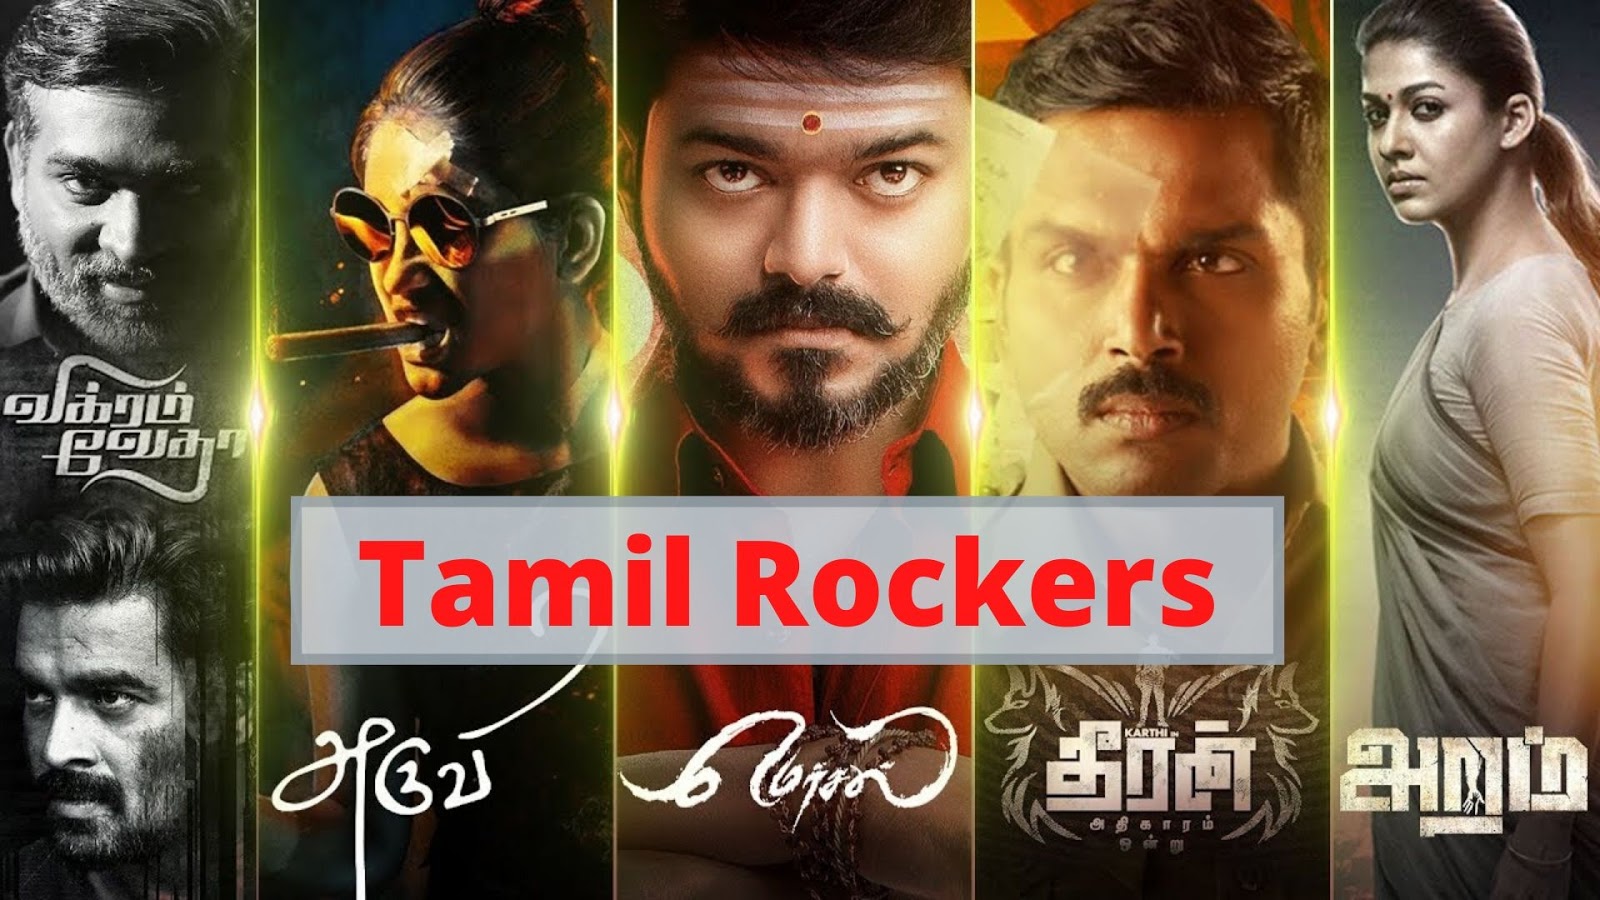 Tamilrockers Latest Tamil HD Movies Tamil rockers 2022 WikiPout